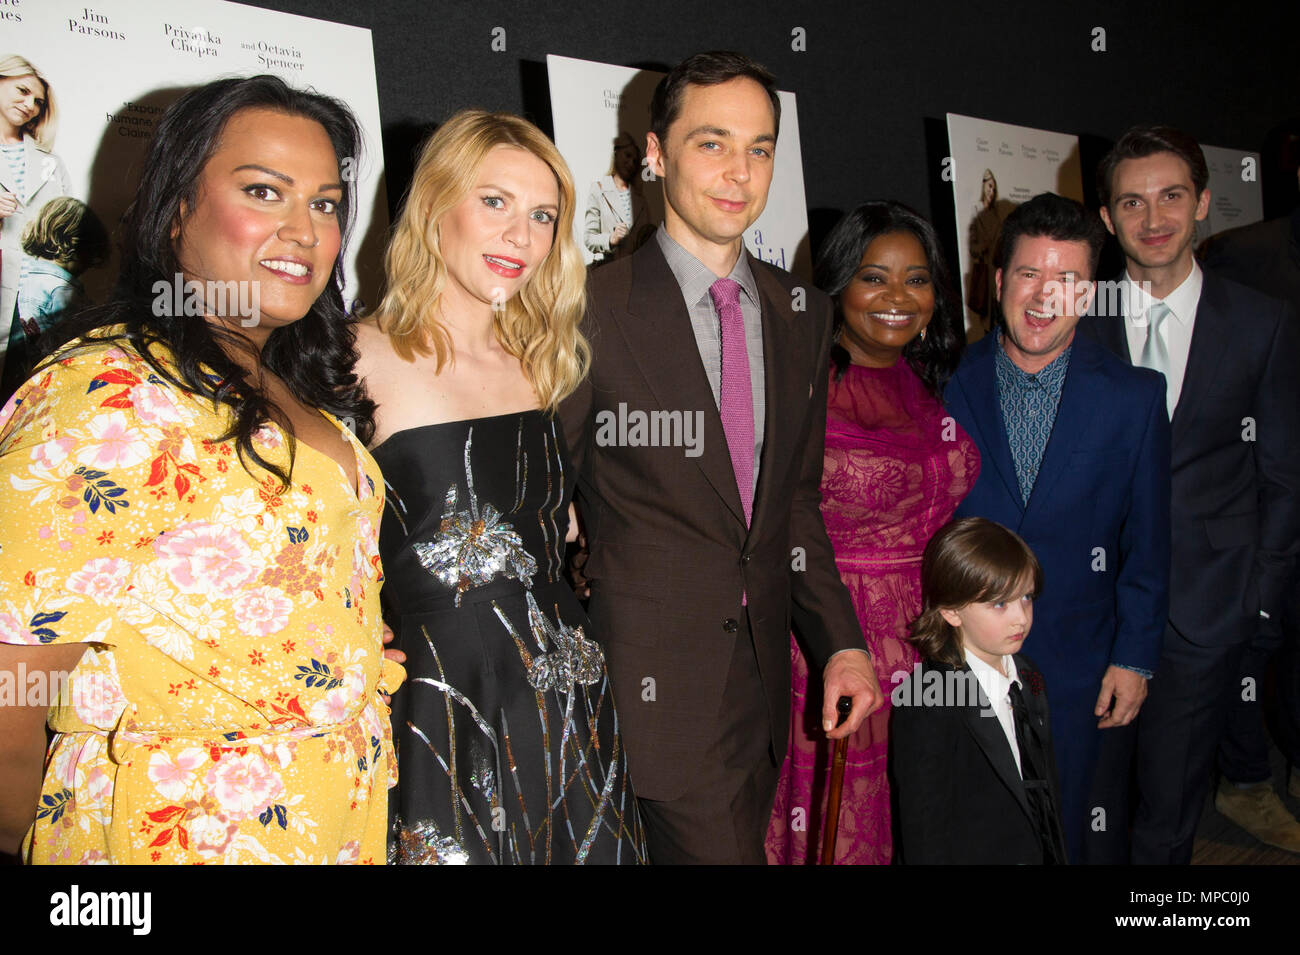 New York, USA. 21st May, 2018. (L-R) Actors Aneesh Sheth, Claire Danes, Jim Parsons, Leo James Davis, Octavia Spencer, director Silas Howard and screenwriter Daniel Pearle attend 'A Kid Like Jake' New York premiere at The Landmark at 57 West on May 21, 2018 in New York City. Credit: Ron Adar/Alamy Live News Stock Photo